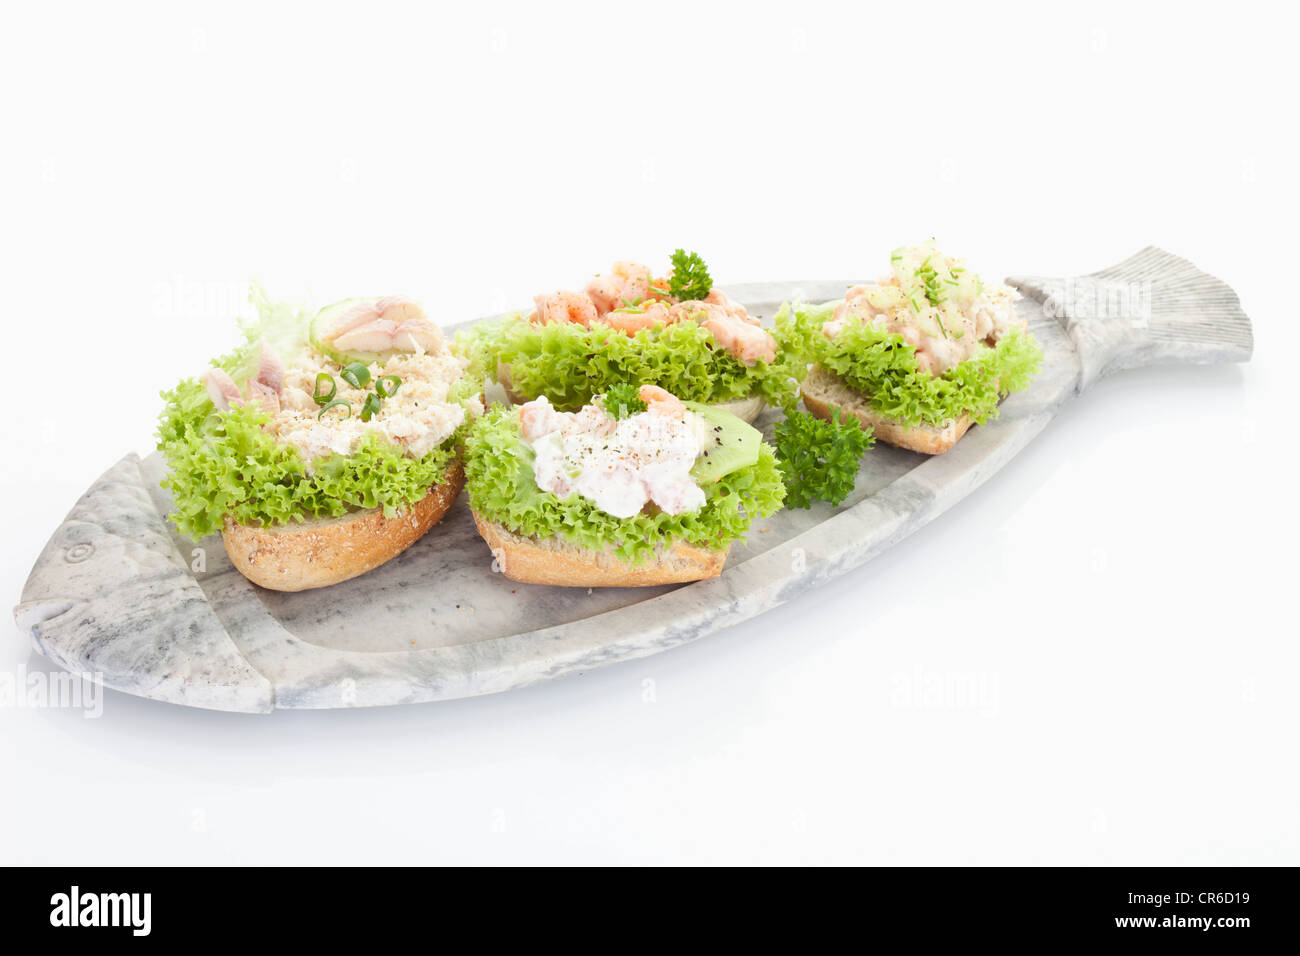 Shrimp and trout fillet tartar sandwiches in plate on white background Stock Photo